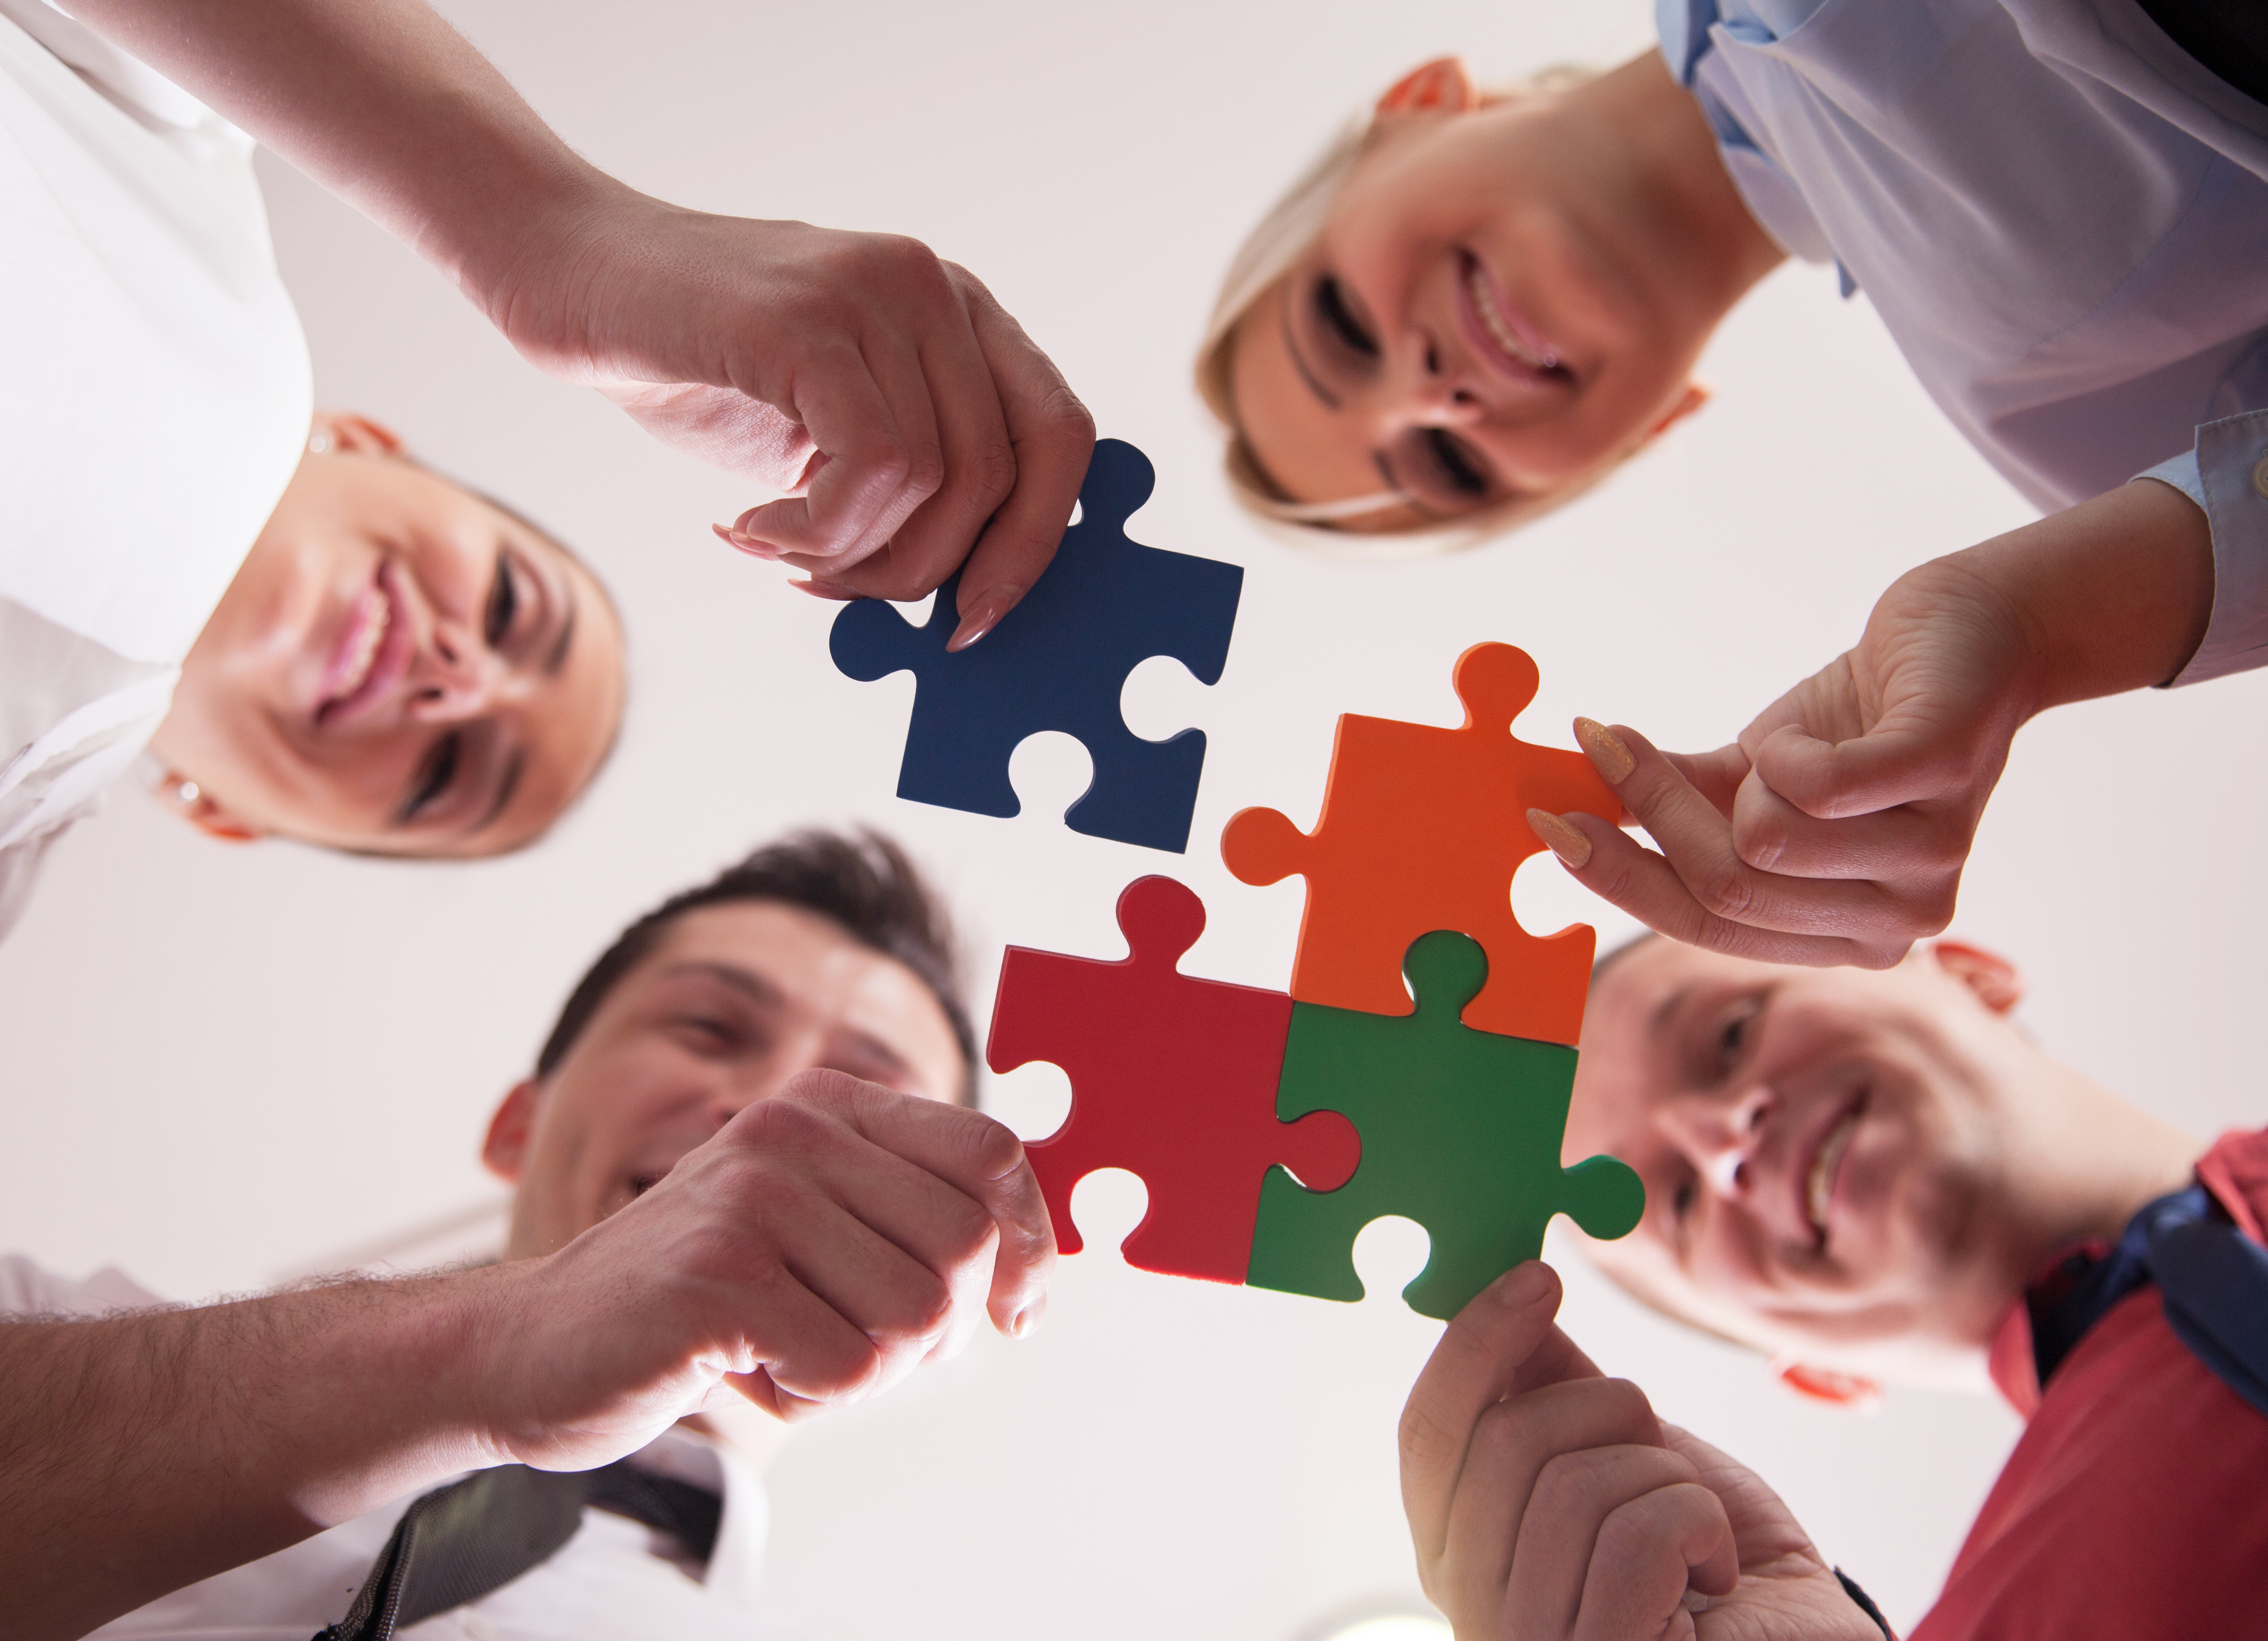 Team-building exercises can bring a boost to business leaders and employees